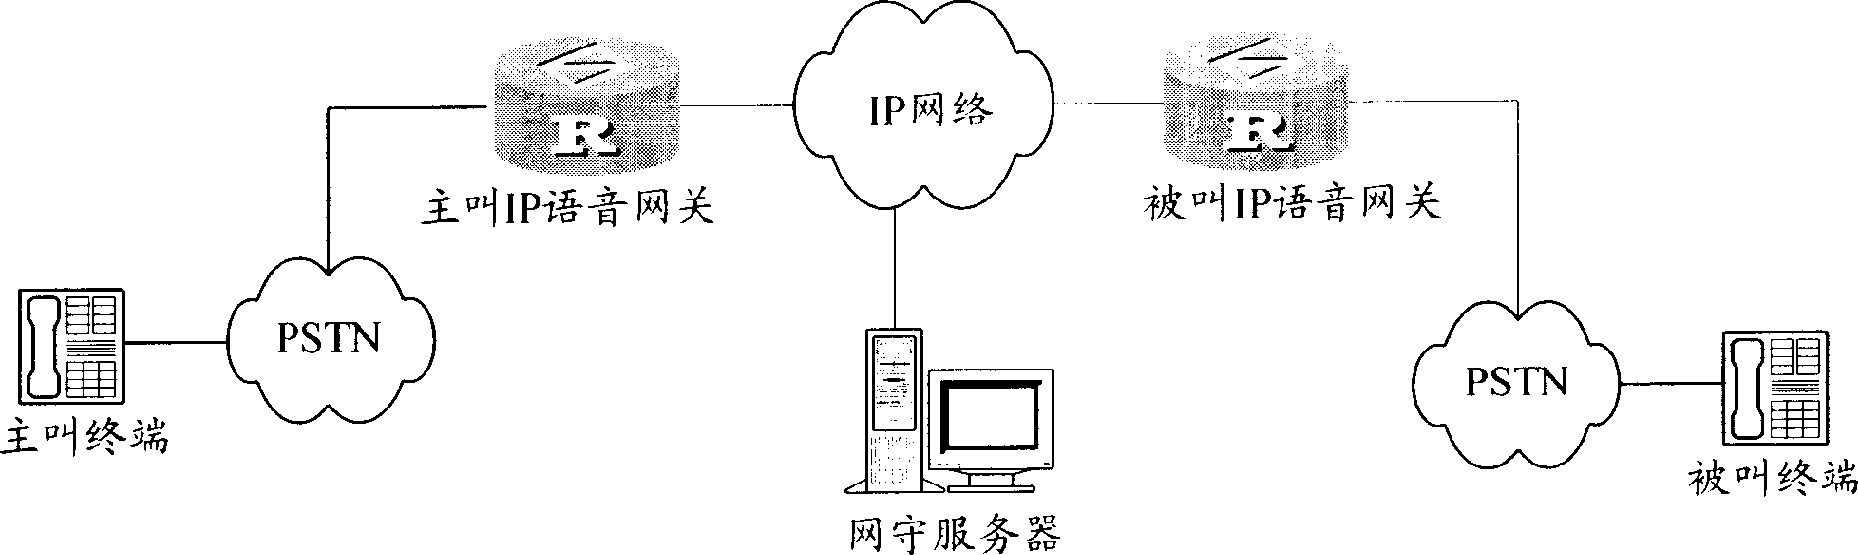 System and method for realizing Internet protocol voice service